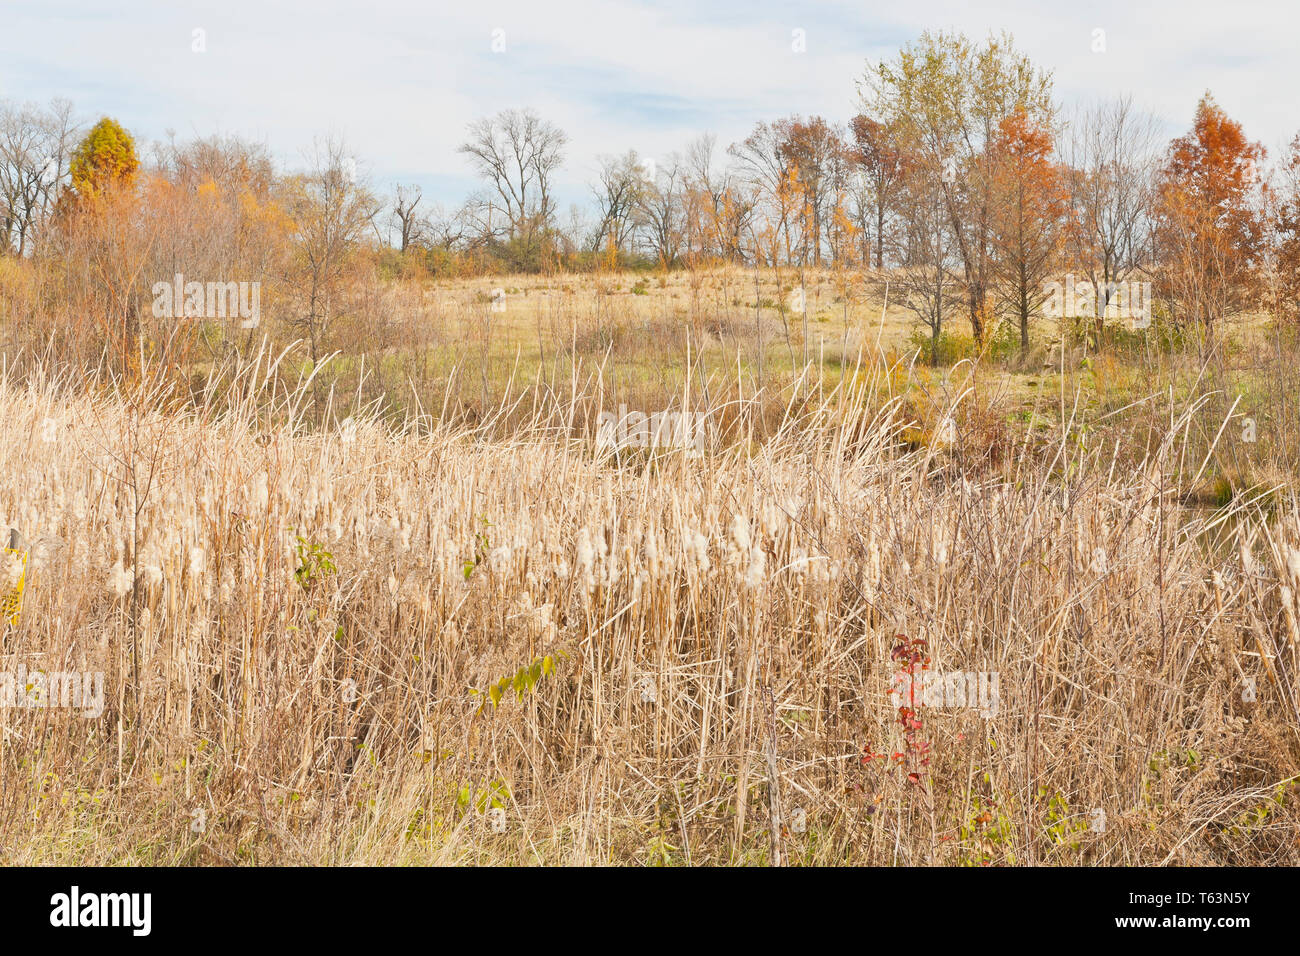 A field of cattails with some bald cypress trees wearing reddish-brown autumn foliage in the background at St. Louis Bellefontaine Conservation Area. Stock Photo